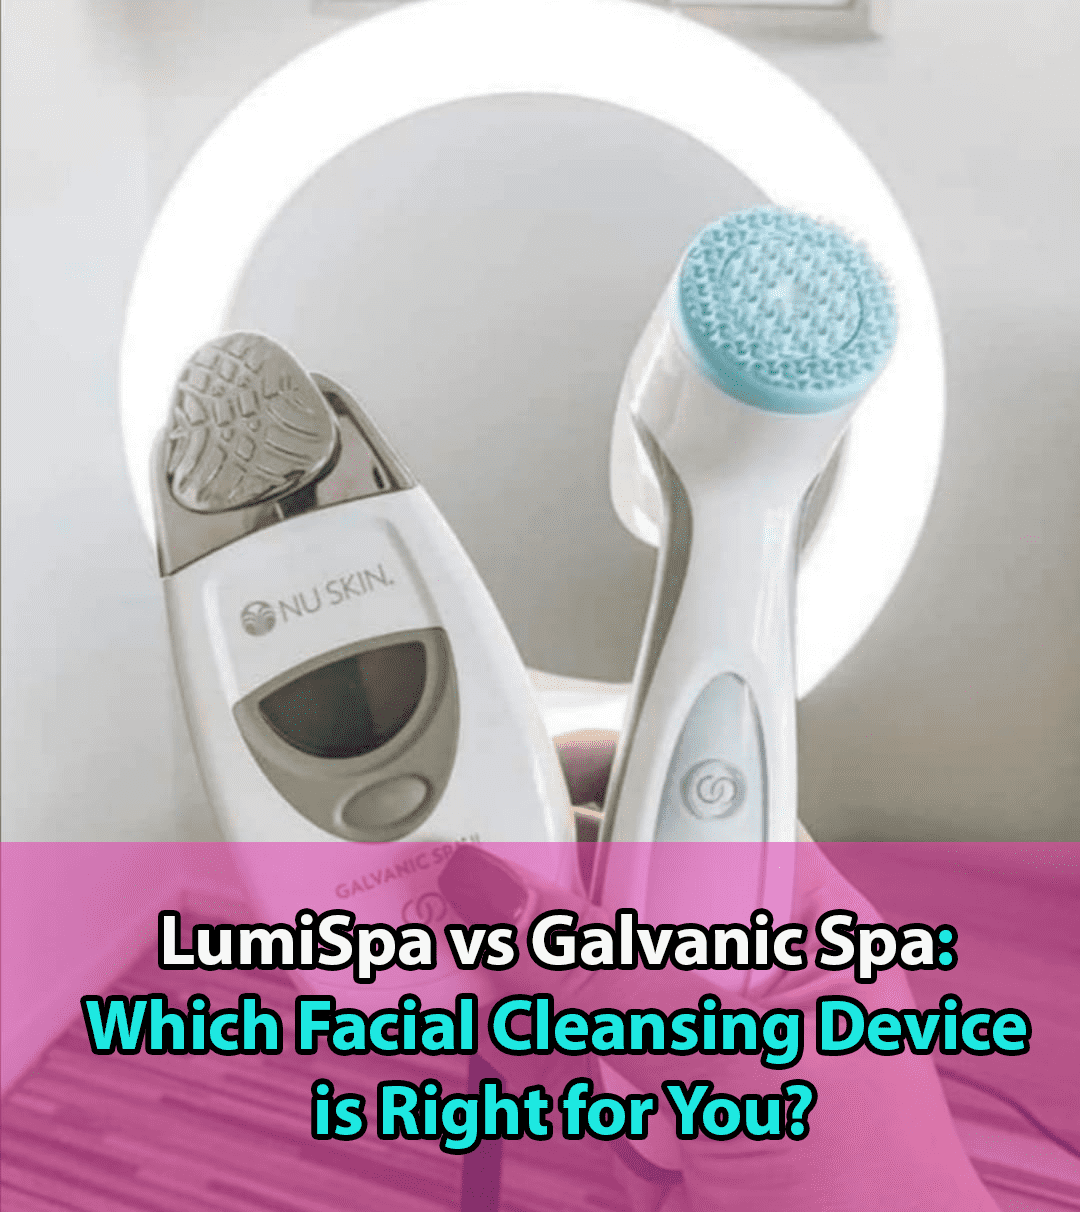 lumispa-vs-galvanic-spa-which-facial-cleansing-device-is-right-for-you